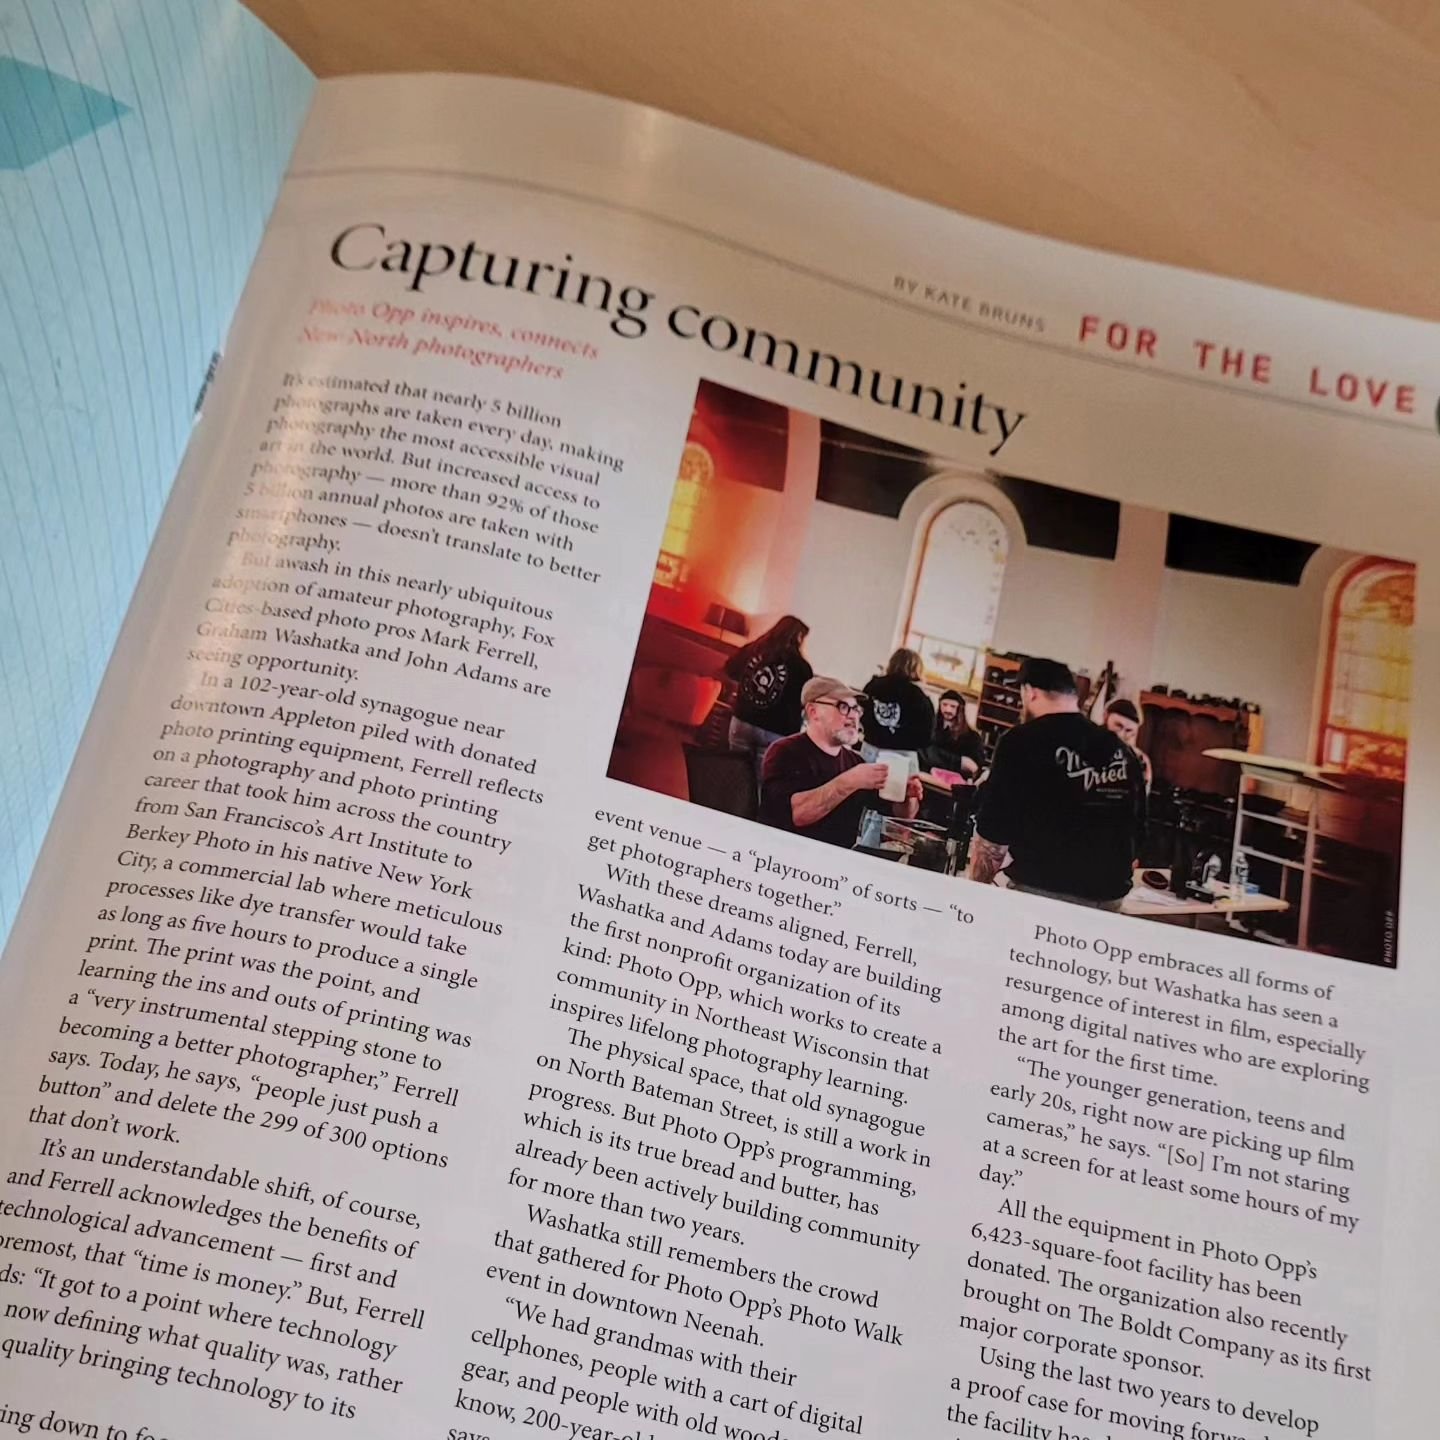 Check out Photo Opp in the latest @insightpubs issue! 🤩 📷

#capturingcommunity